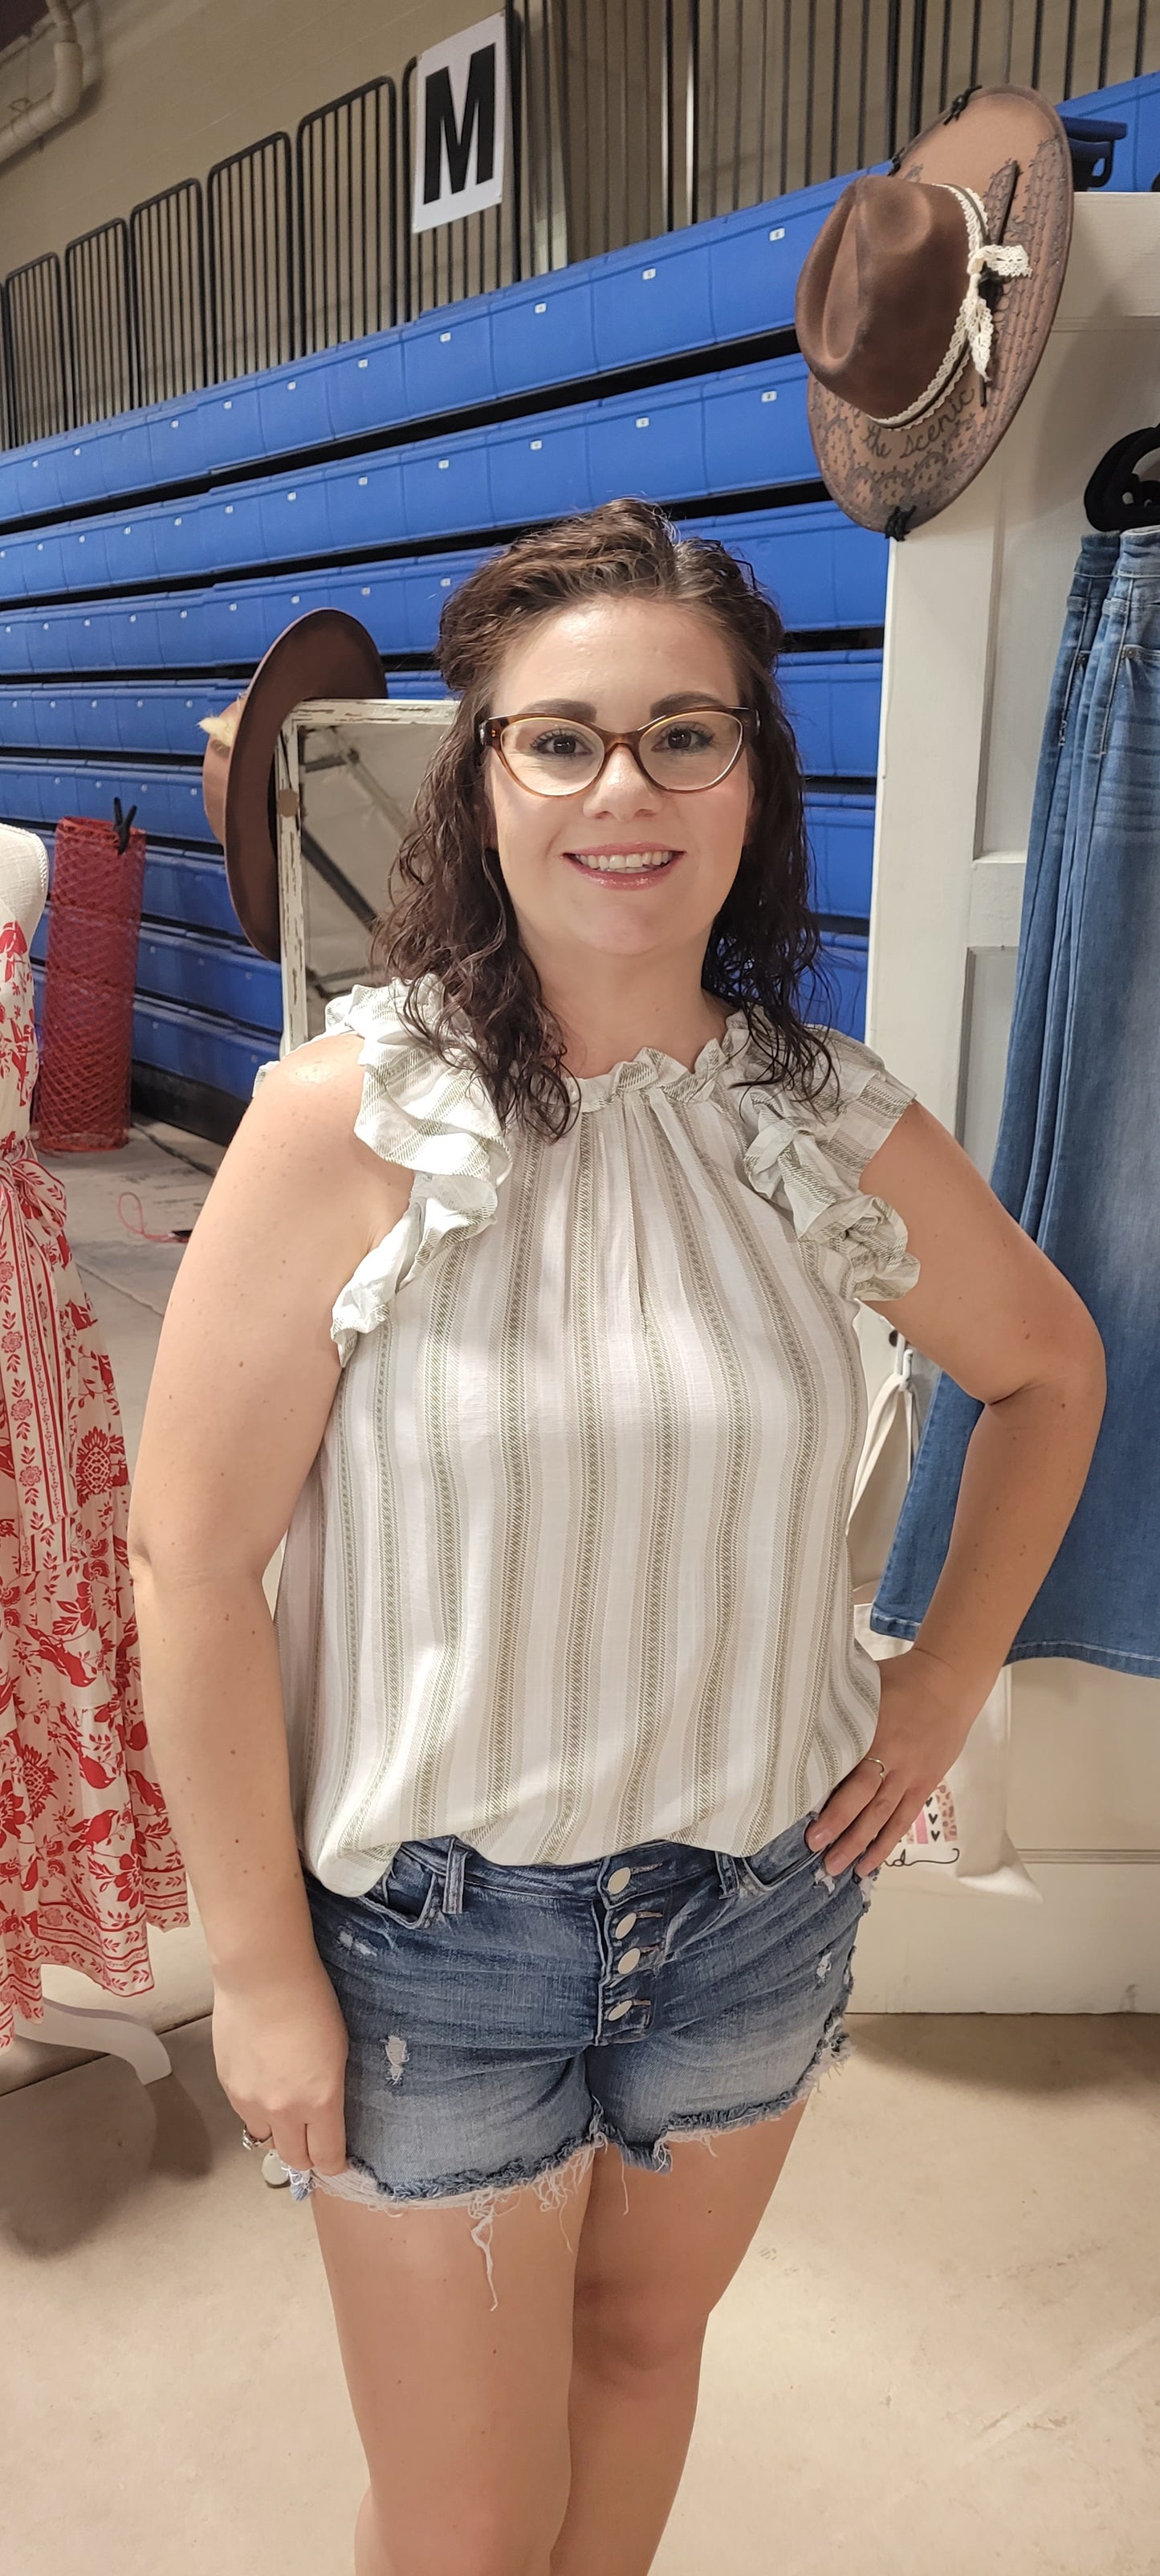 Take your style up a notch with the "Out For The Day" top! It's the perfect go-to for a day out, with a classy round neckline and chic double ruffle cap sleeves. Plus, the button with a keyhole at the back adds a touch of sass and a hint of mystery. Pop it on and get ready to turn heads! Sizes small through large.